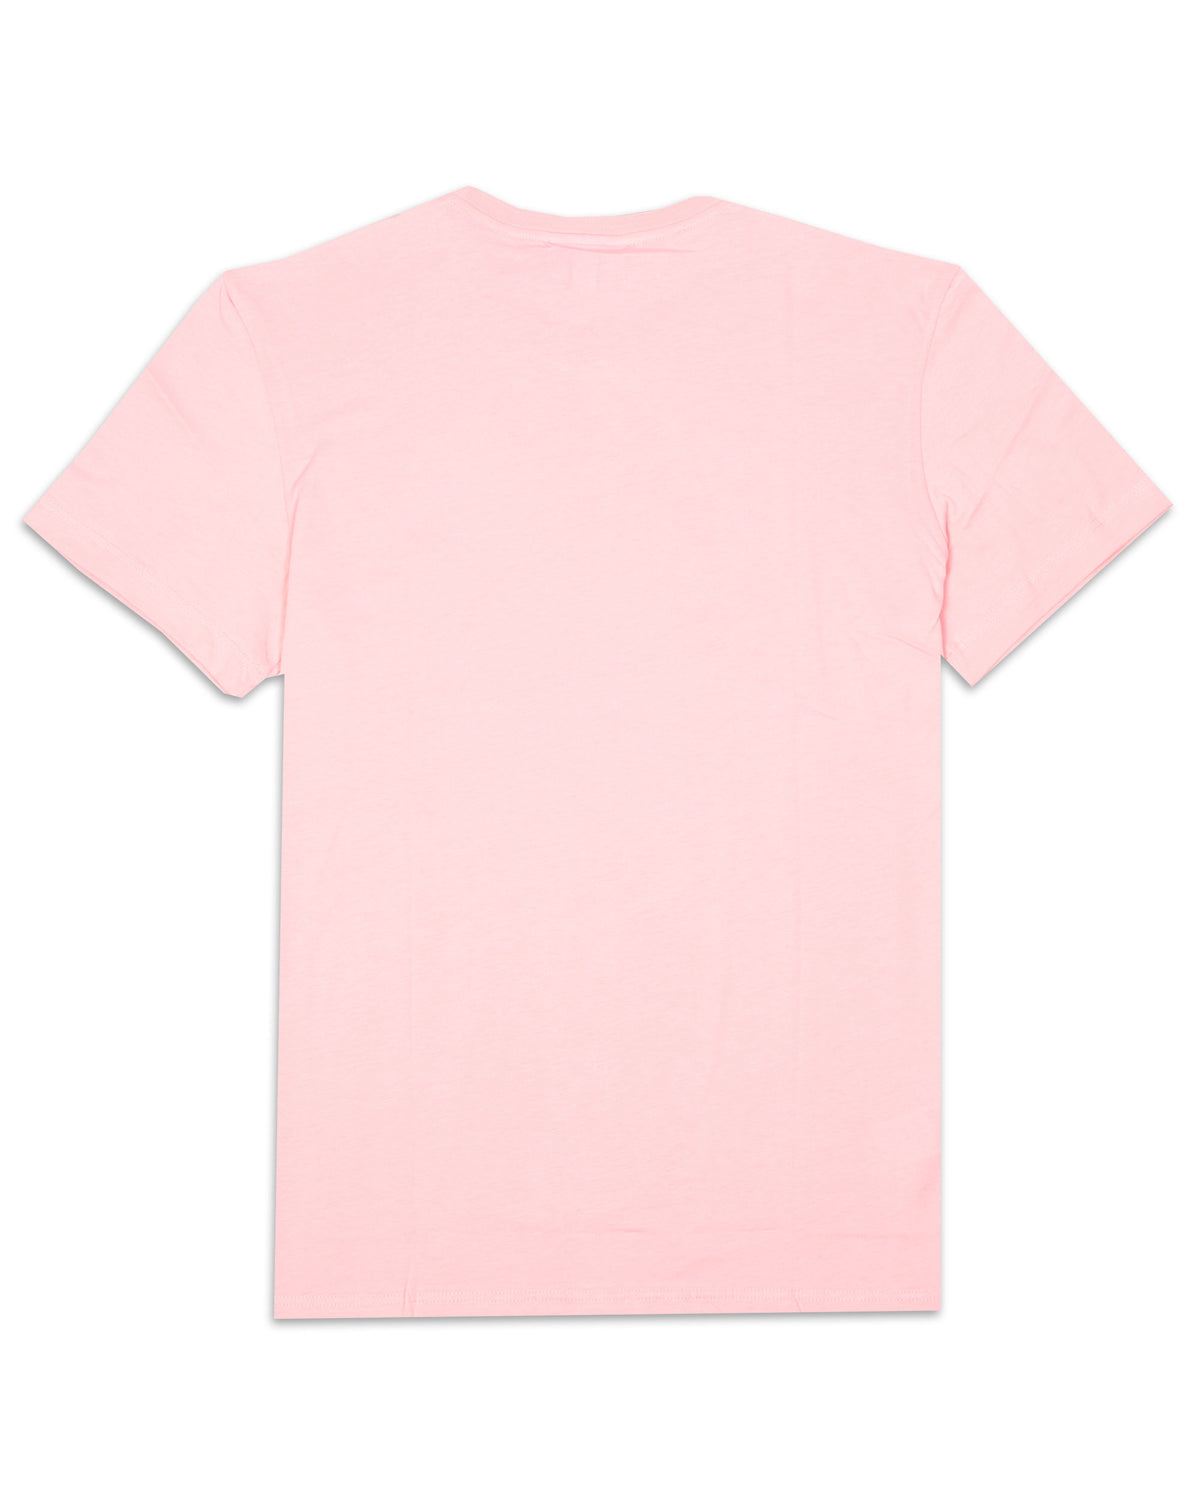 Classic logo Tee Pink TH2038-7SY